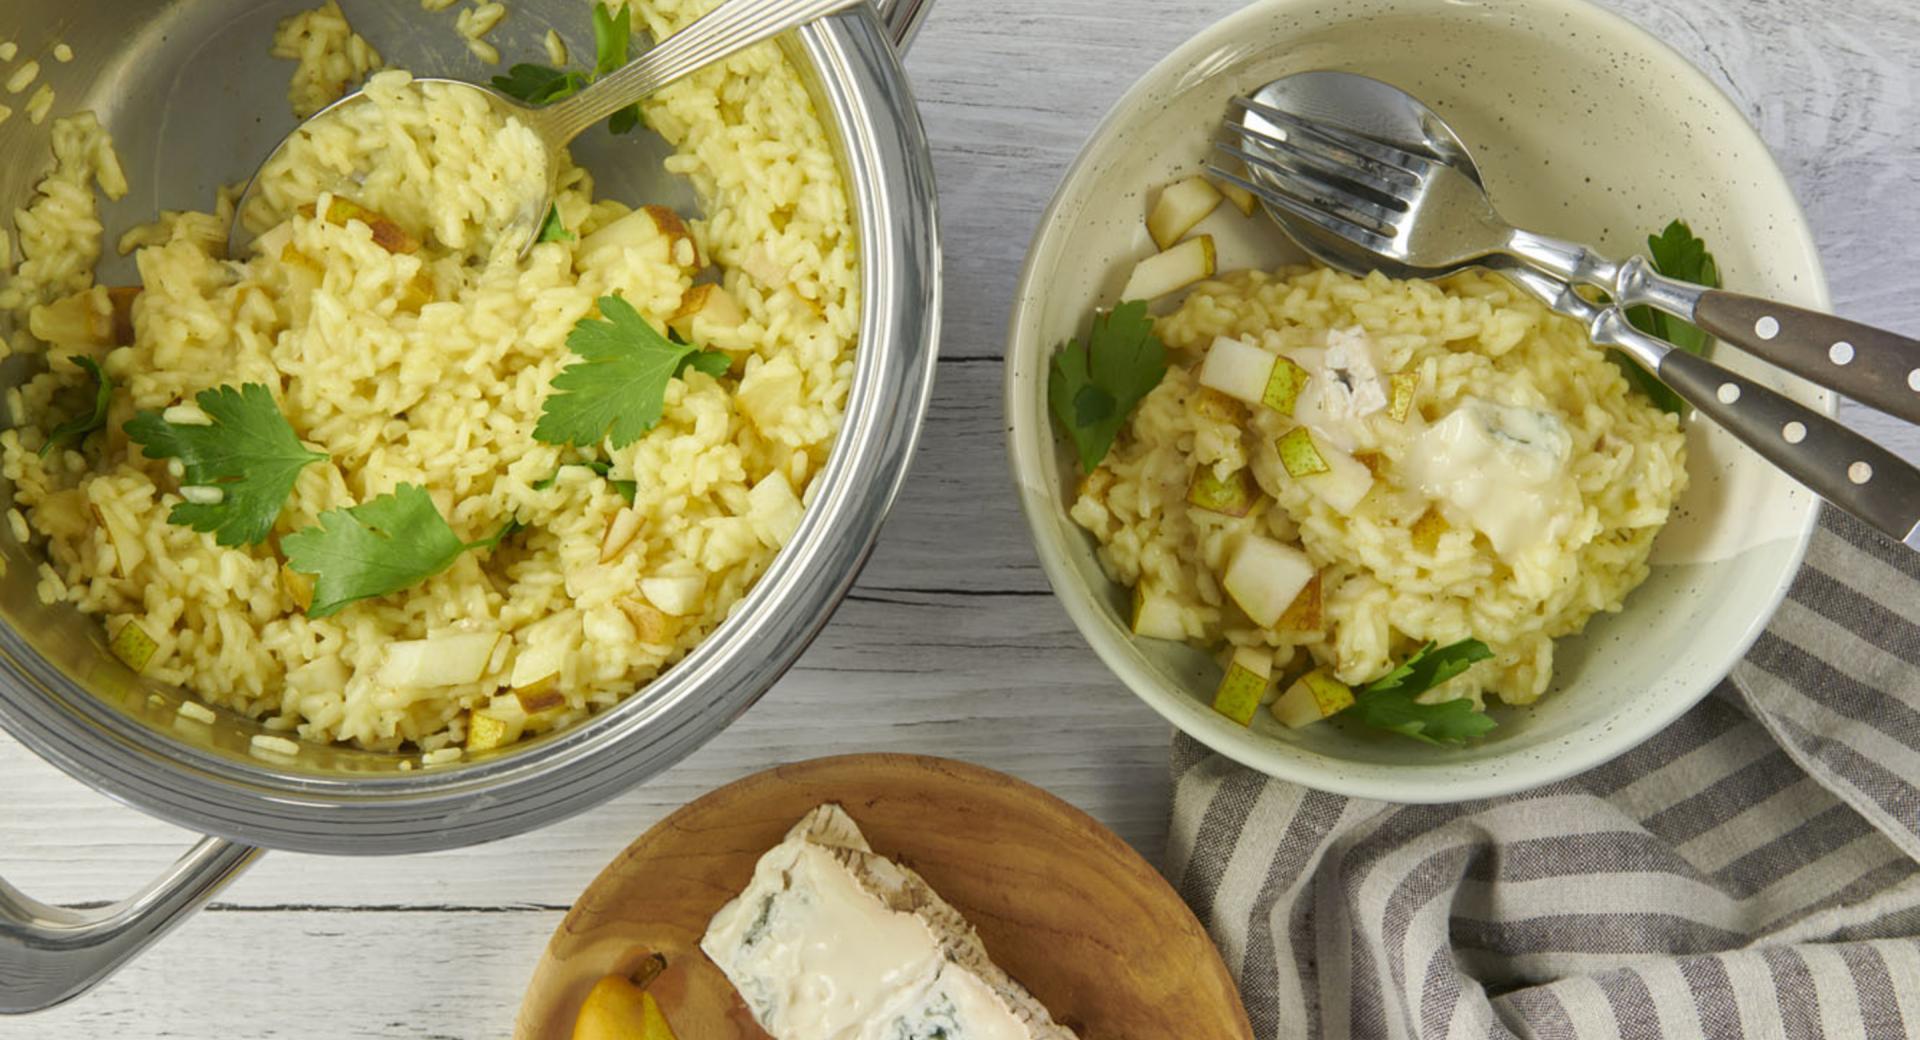 Pear risotto with Gorgonzola cheese